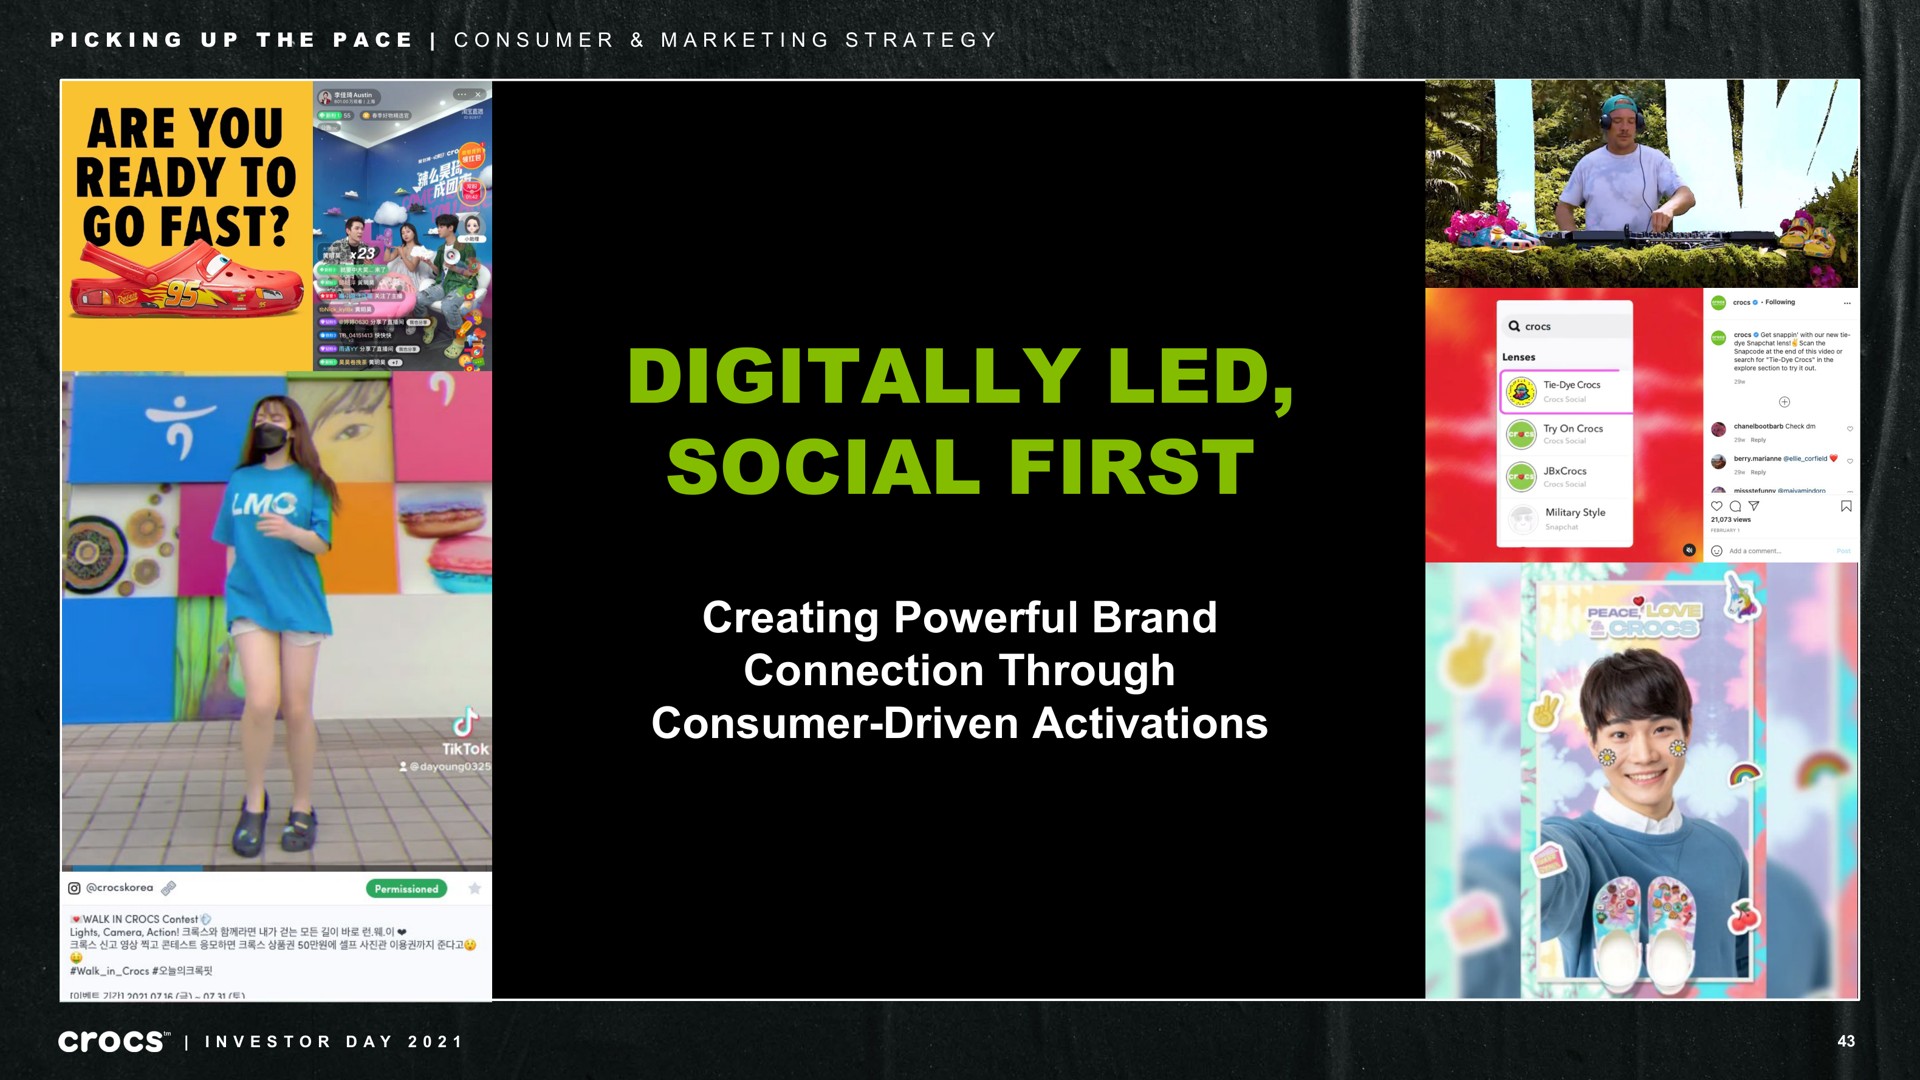 digitally led social first creating powerful brand connection through consumer driven activations picking up the pace consumer marketing strategy be aes i investor day | Crocs